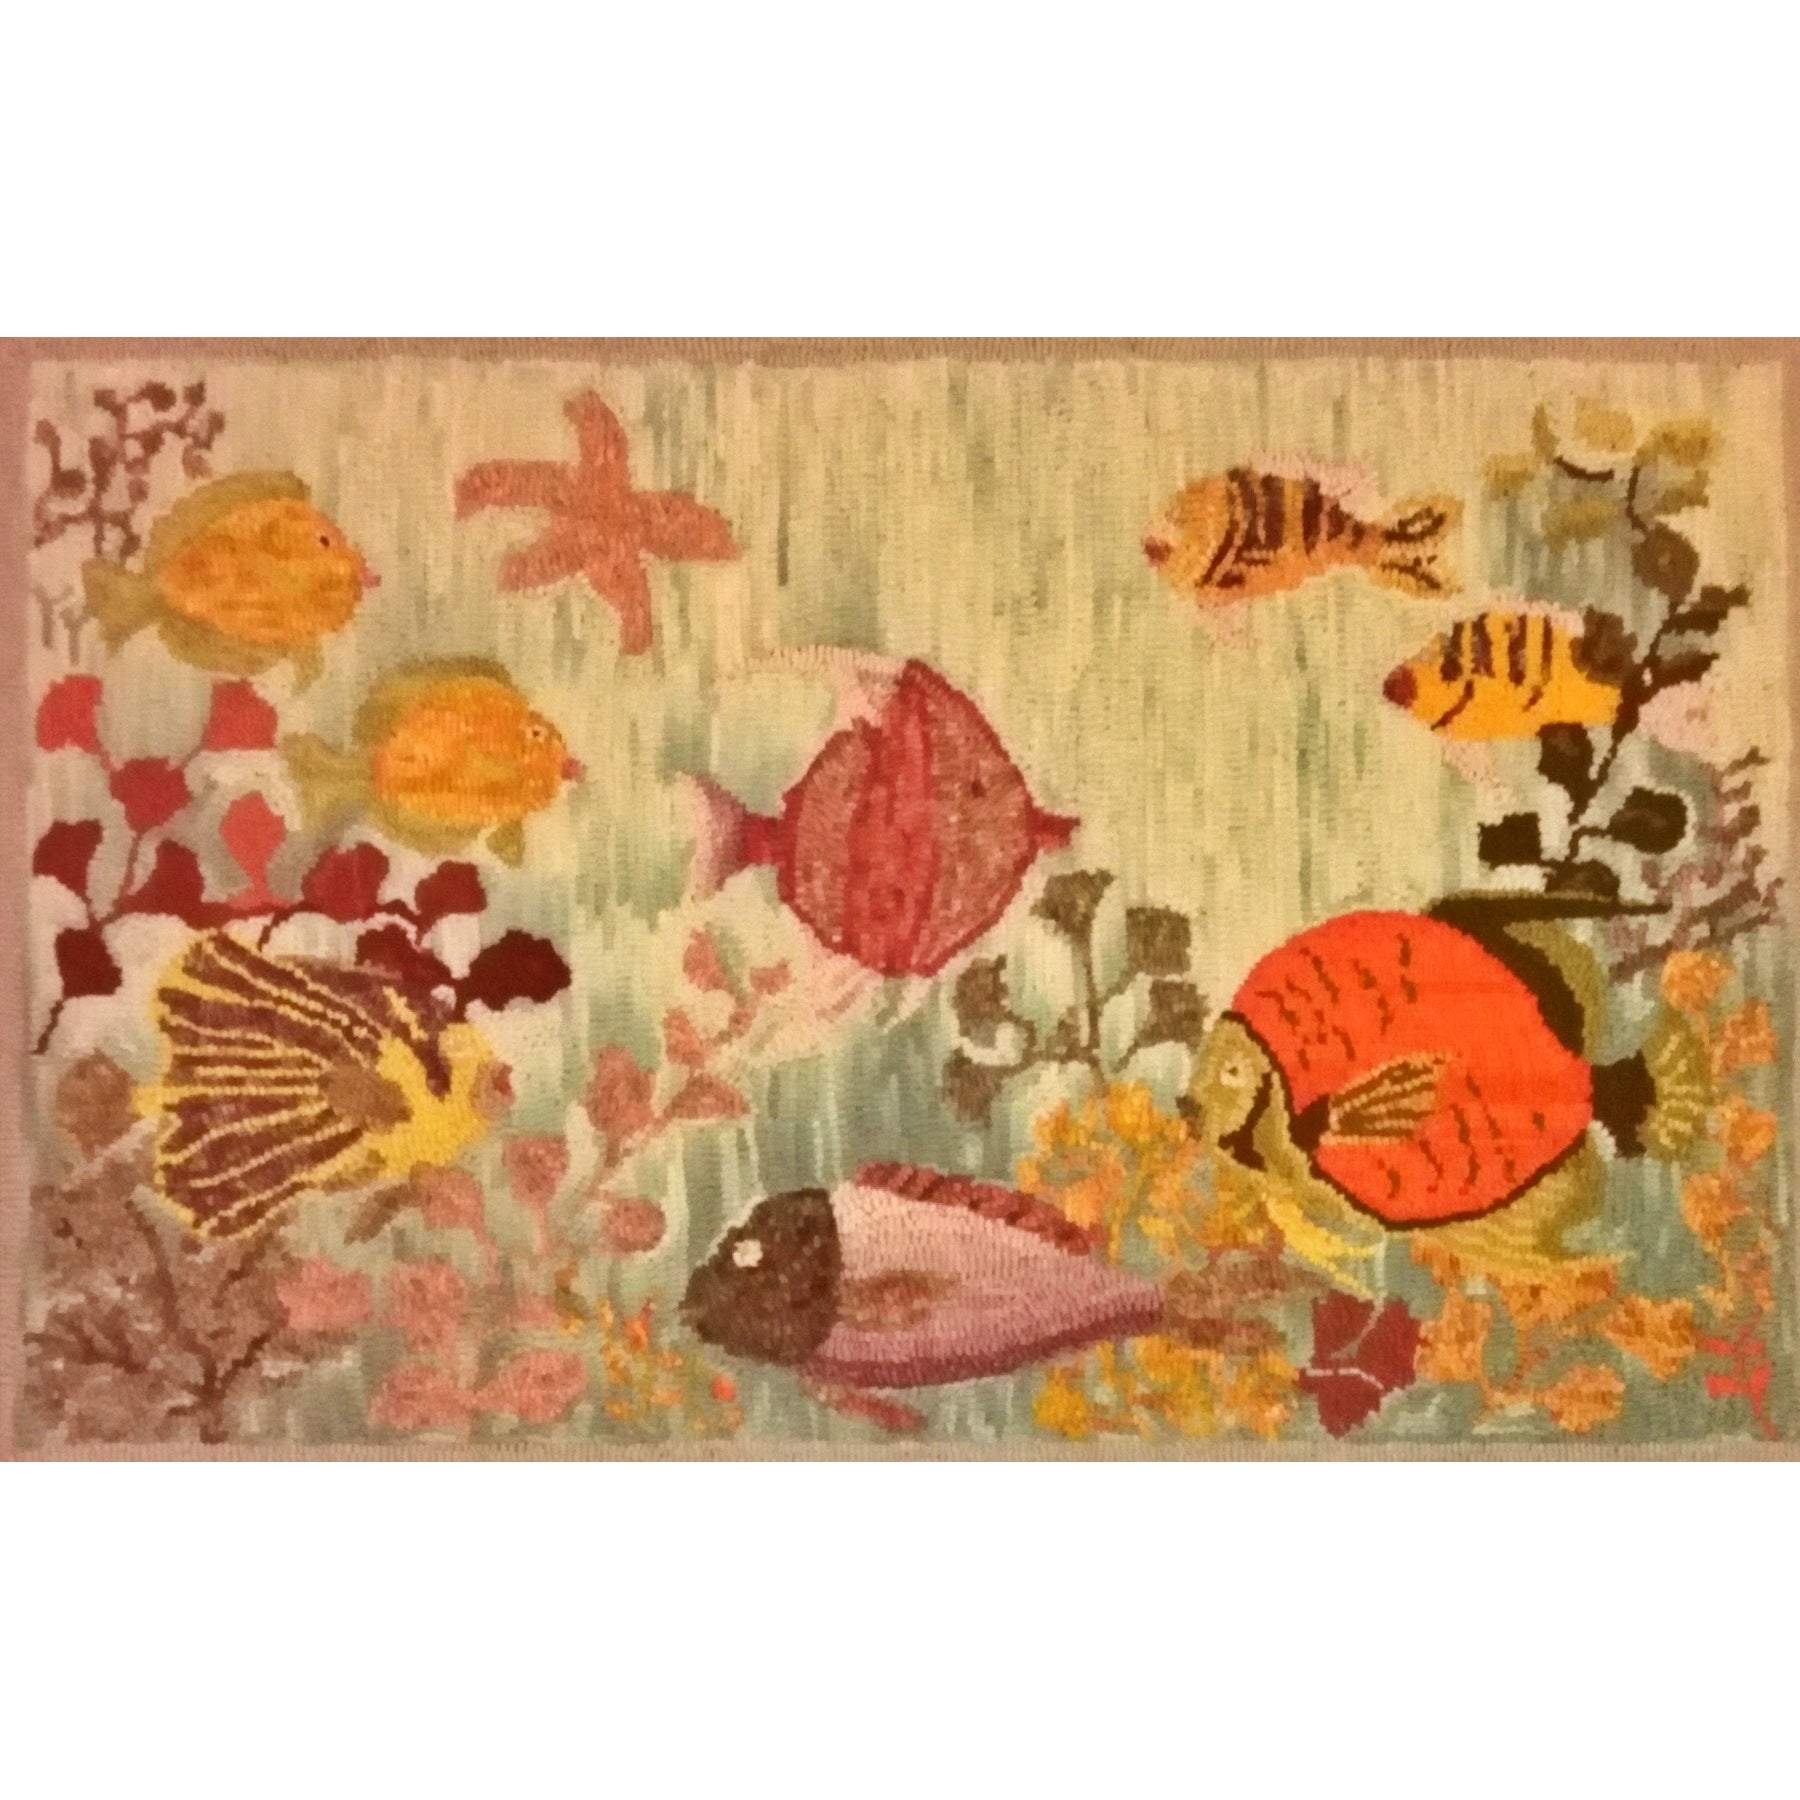 Coral Reef, rug hooked by Yvonne Yowell